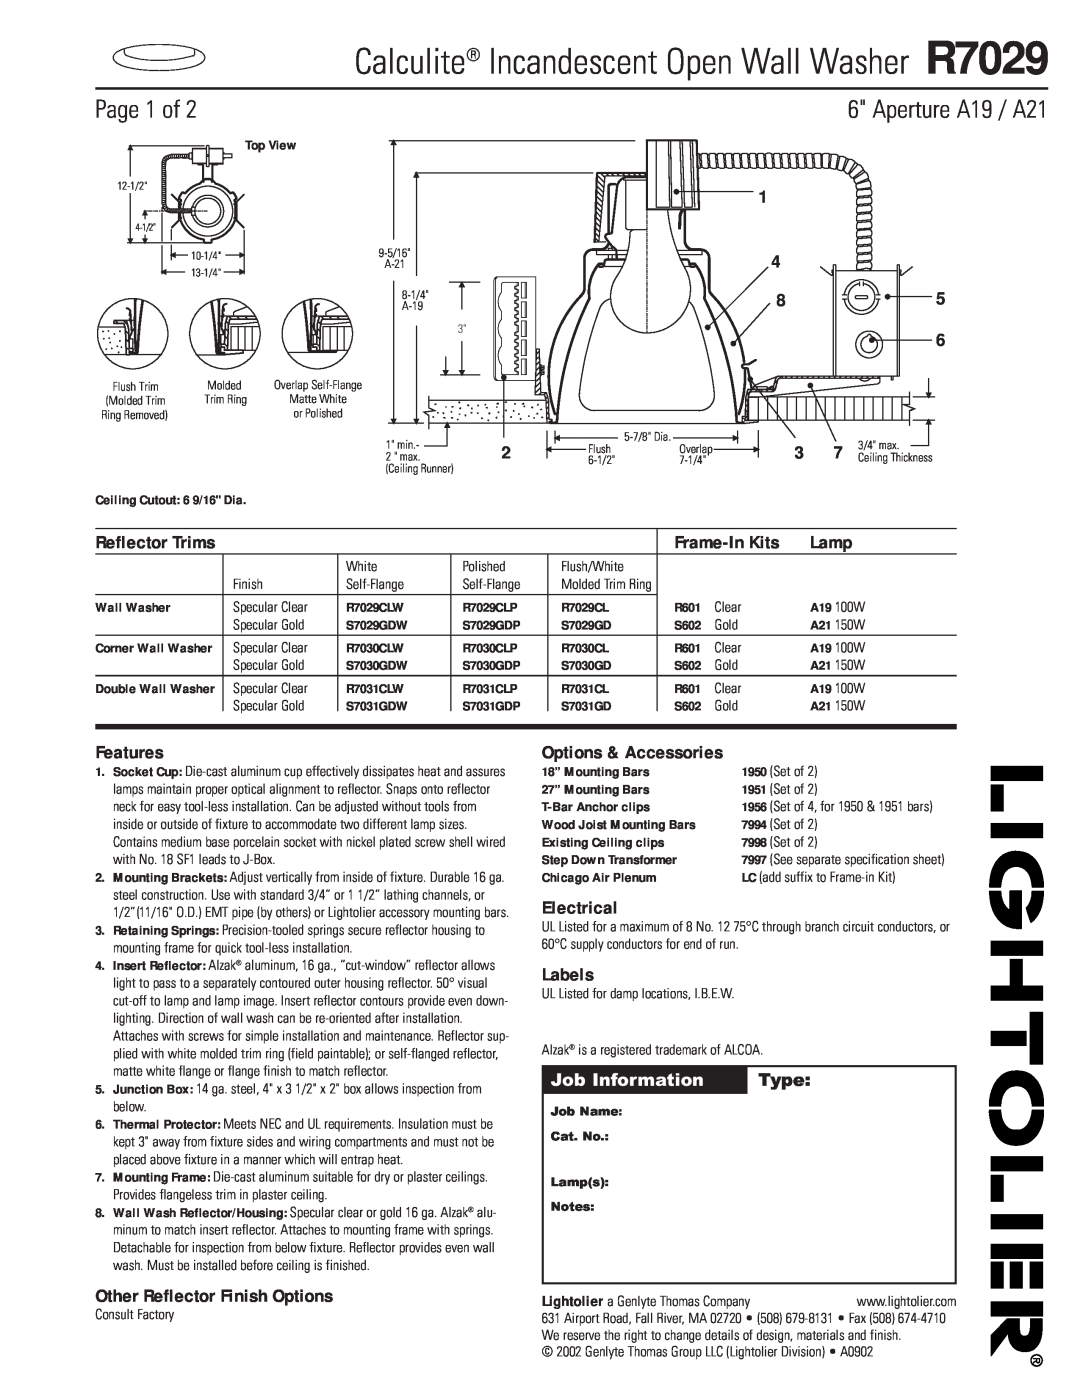 Lightolier R7029 specifications Page 1 of, Aperture A19 / A21, Frame-InKits, Lamp, Features, Options & Accessories, Labels 